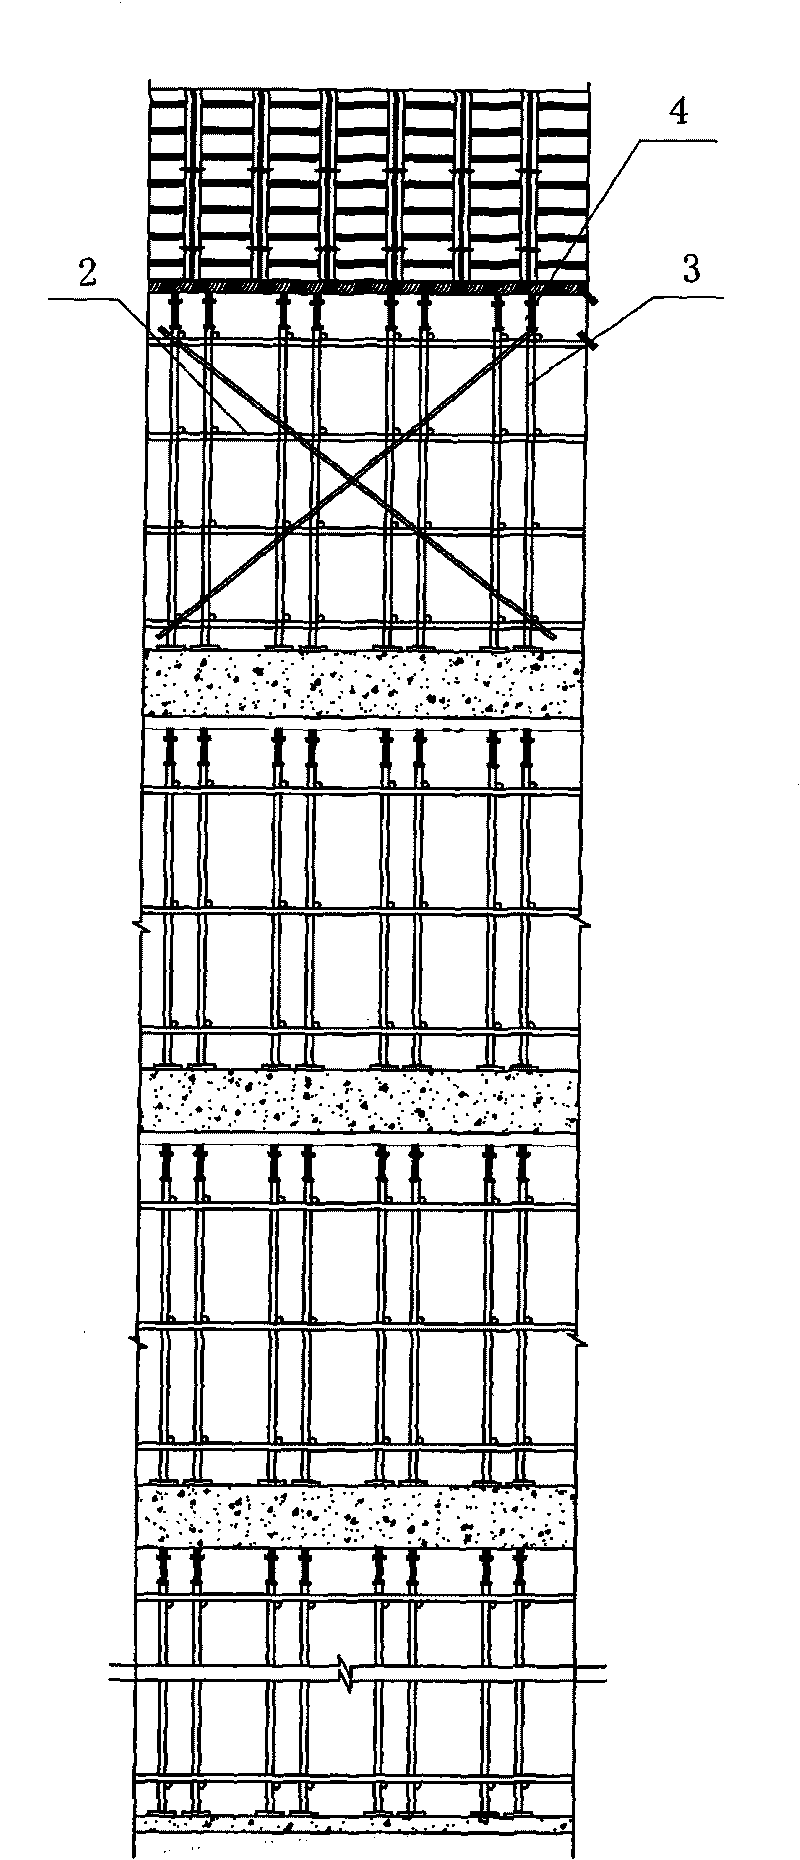 Supporting structure of beam type conversion layer template and method for strengthening substructure